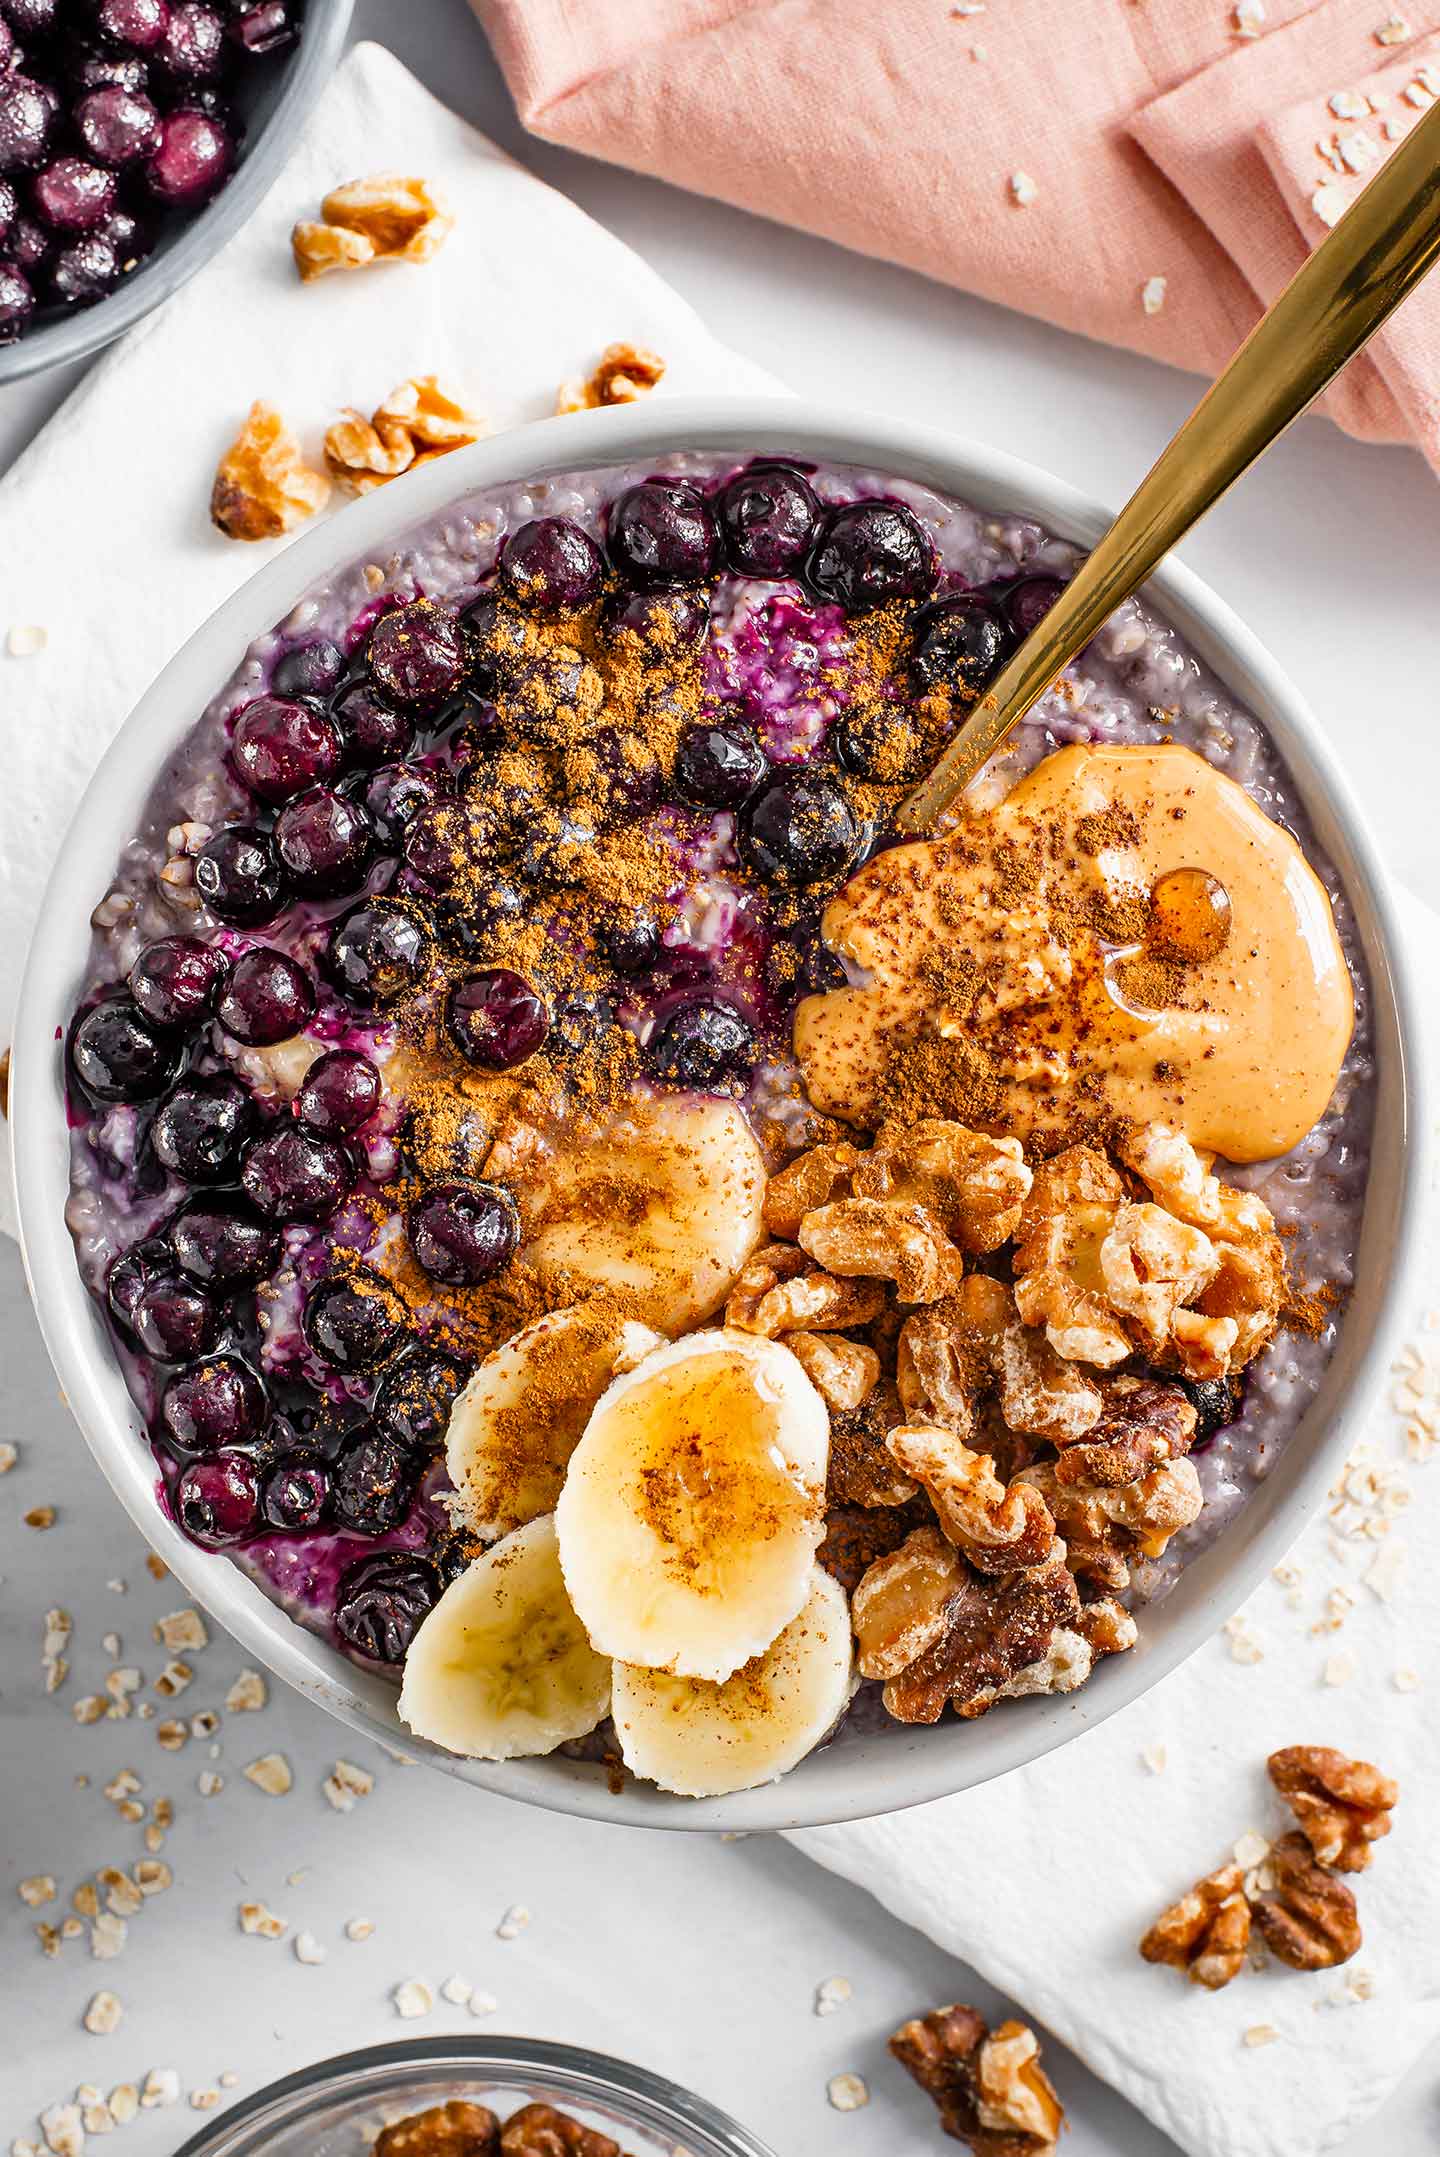 Top down view of blueberry banana oatmeal loaded with toppings. Saucy blueberries, banana slices, toasted walnuts, a dollop of peanut butter, and a sprinkle of cinnamon fill the top of the oats.